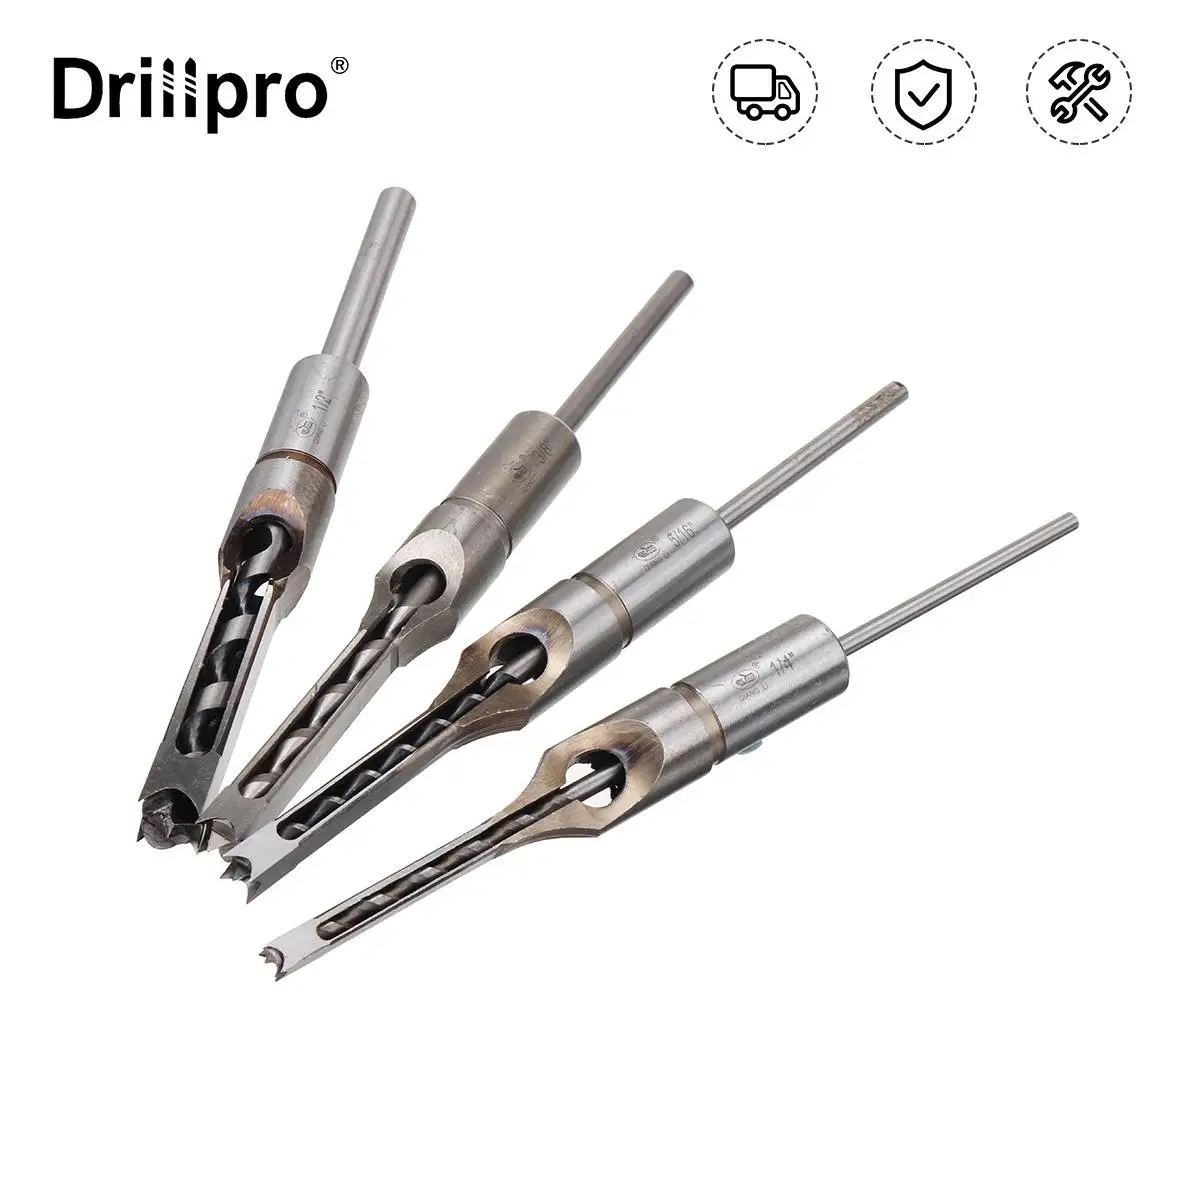 

Drillpro 4pcs Square Hole Drill Bits Woodworking Auger Mortising Chisel Set Kit 1/4 to 1/2 Inch Tool for Mortise Tenon Machine